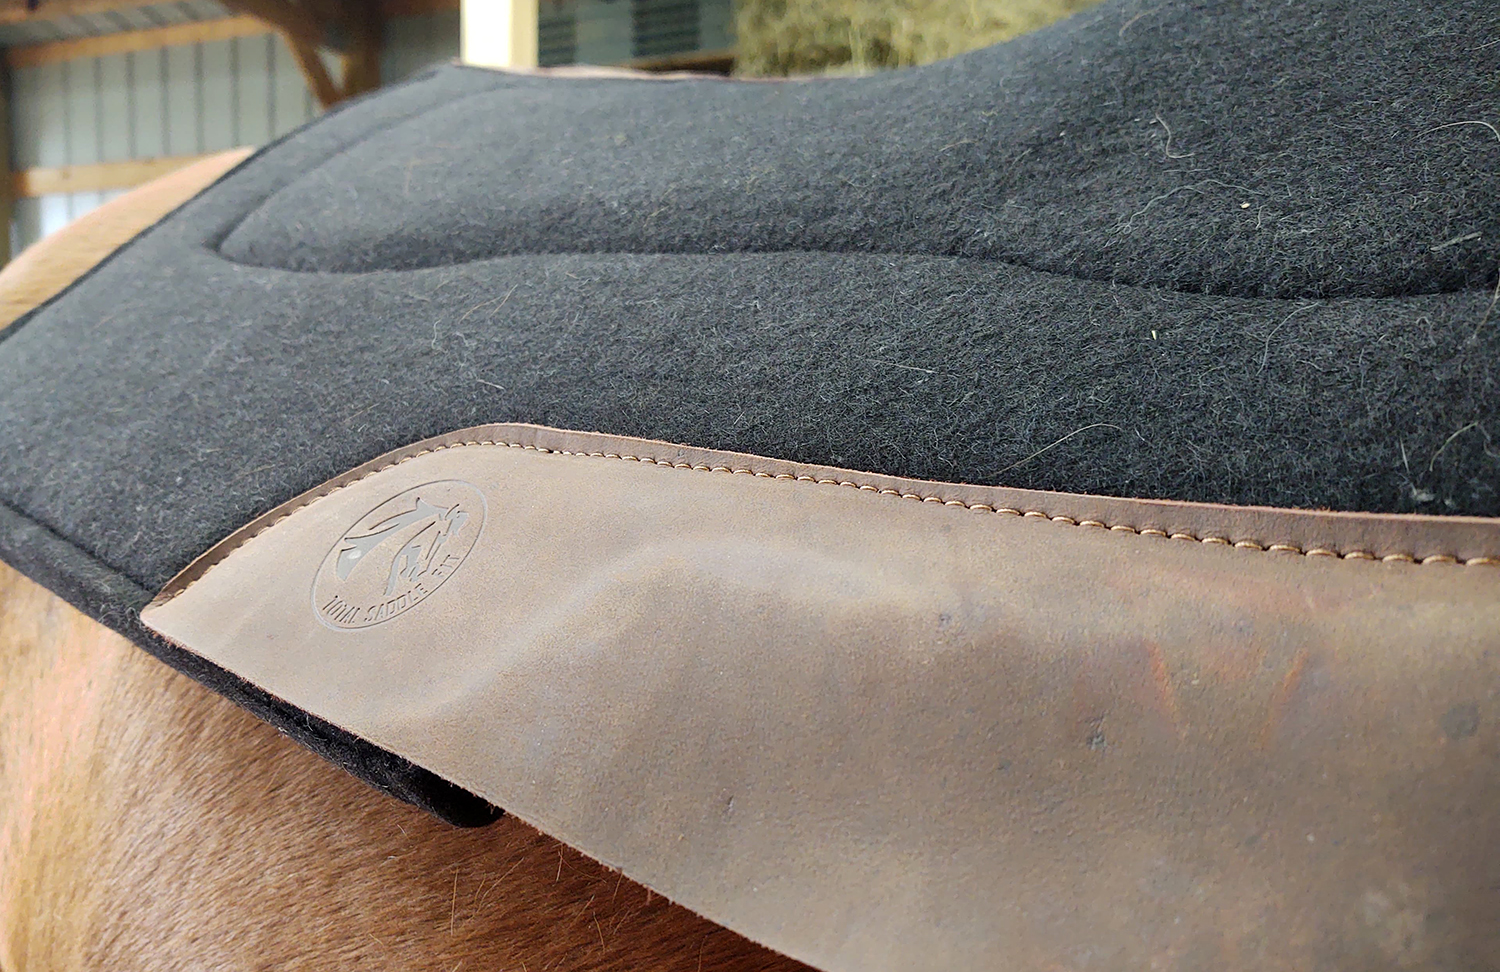 Total Saddle Fit Perfect Saddle Pad Review